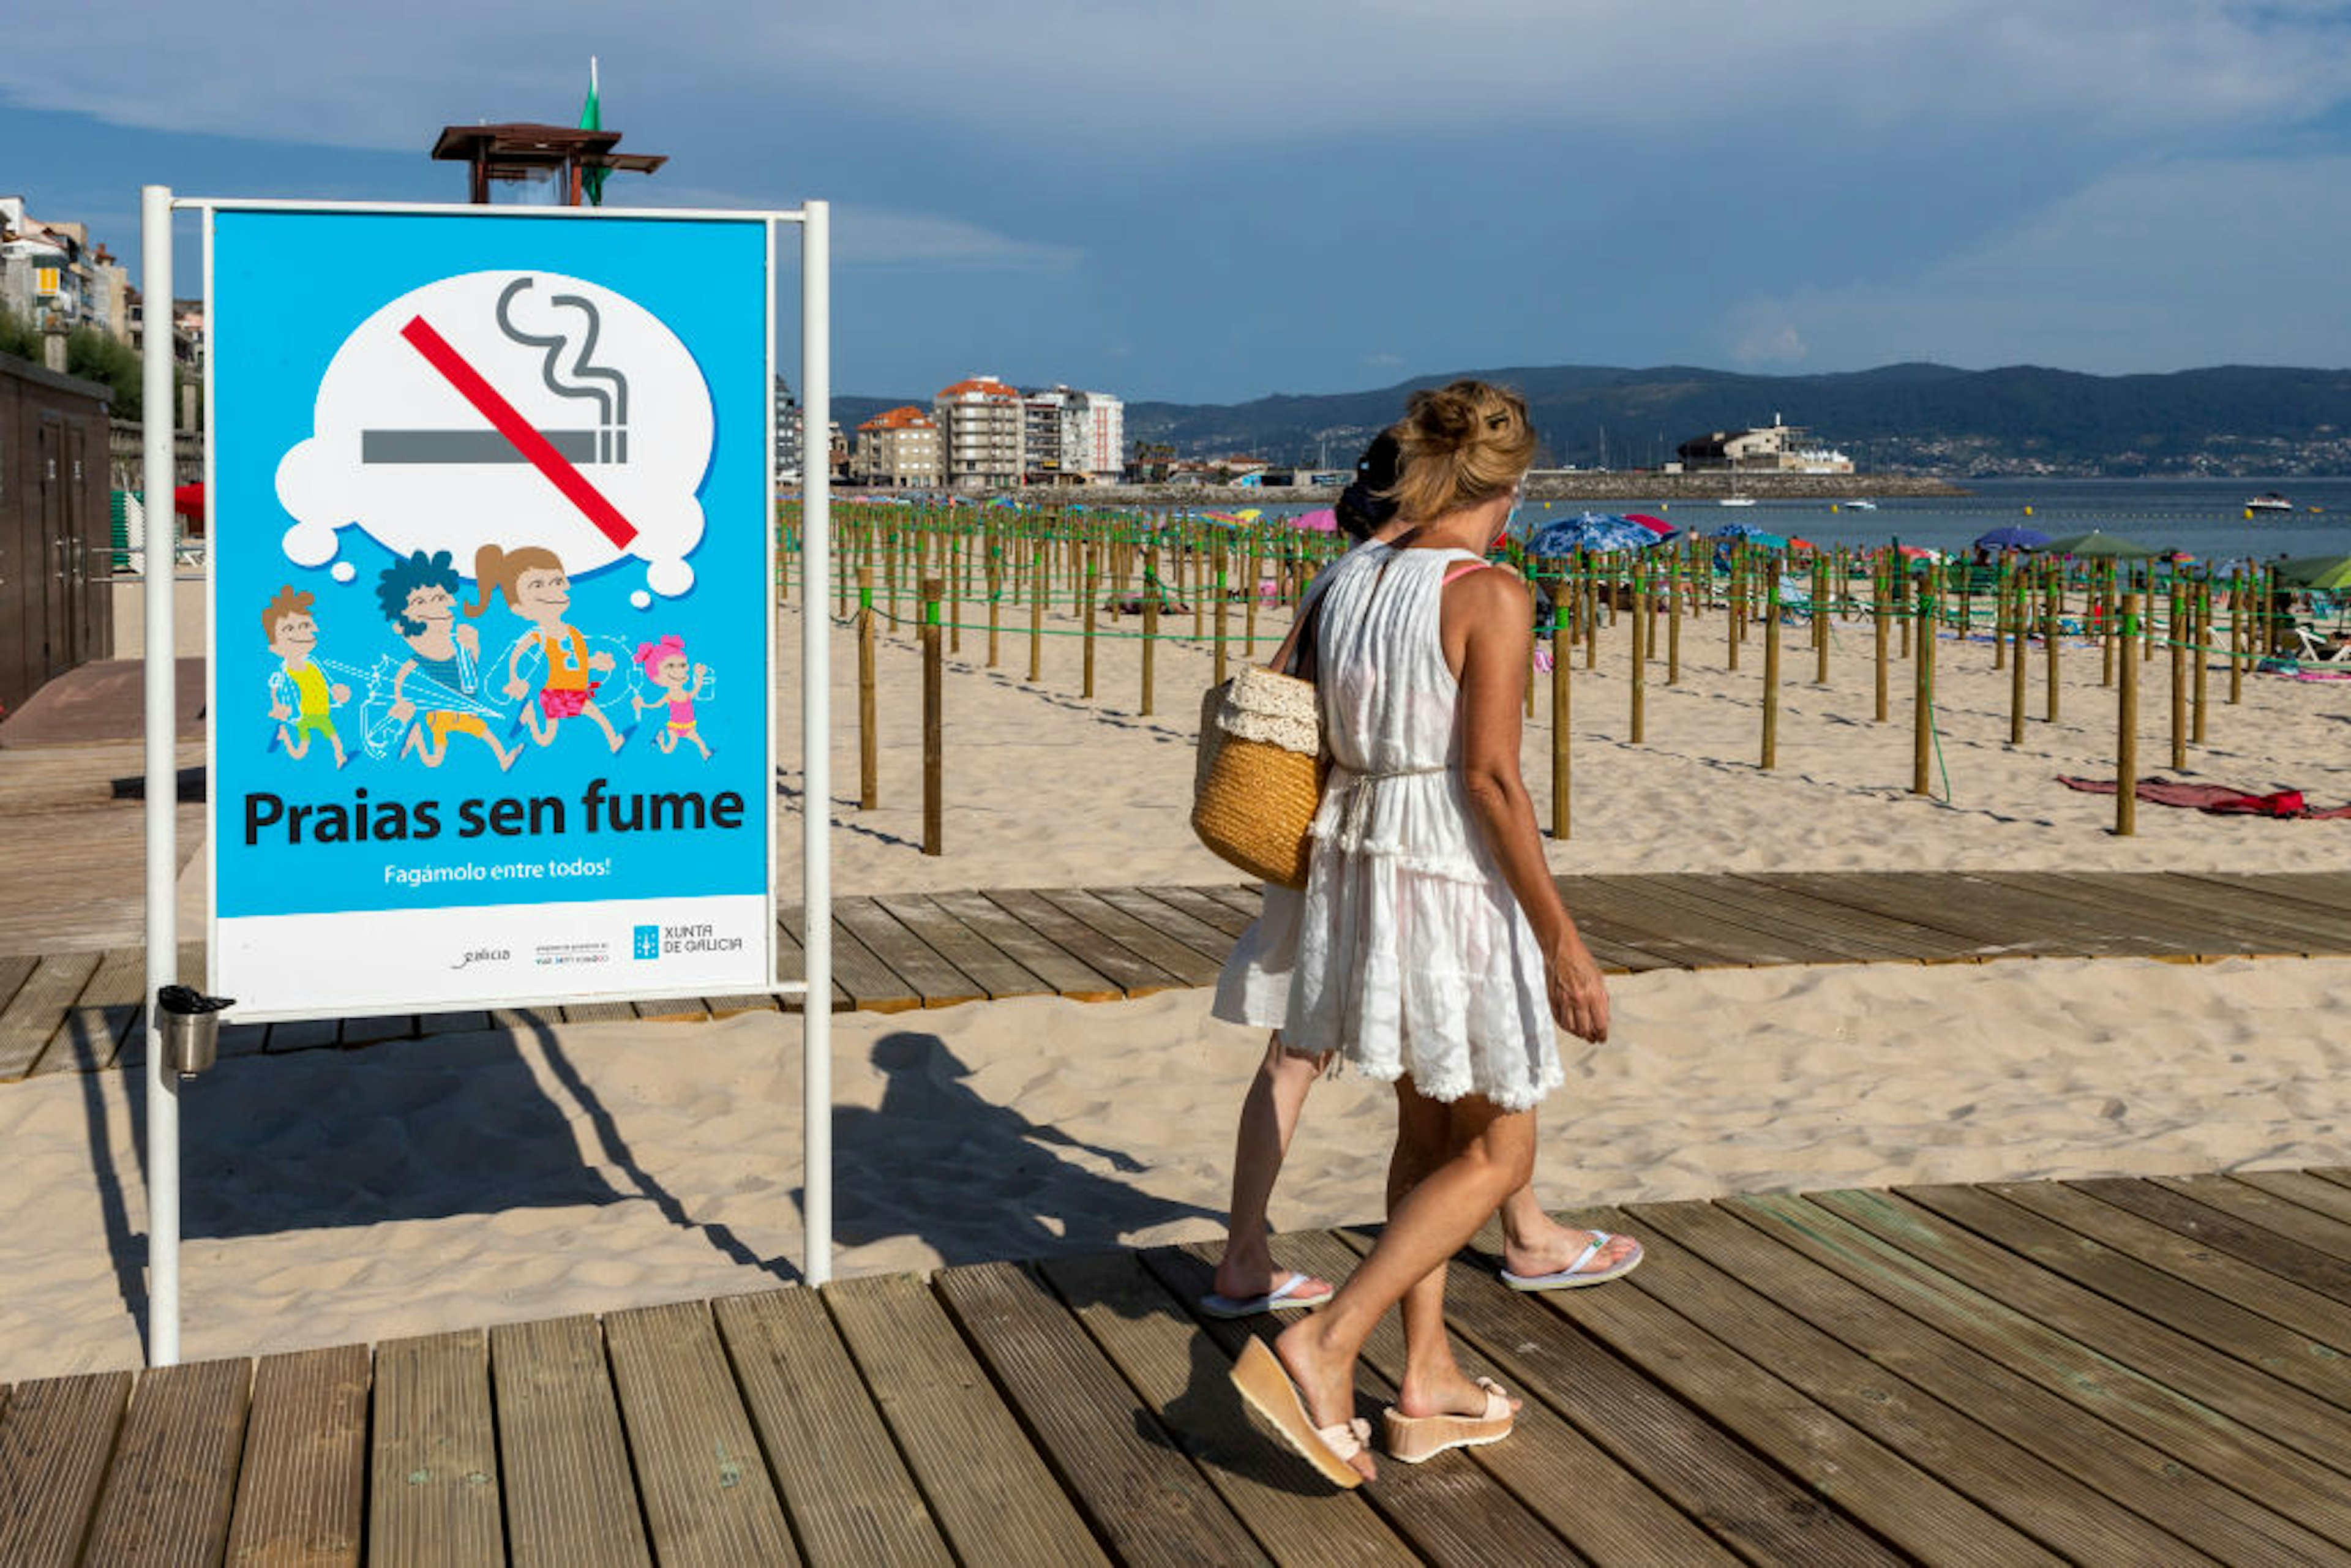 SANXENXO, SPAIN - JULY 11: A sign announces that smoking is prohibited on July 11, 2020 in Sanxenxo, Galicia, Spain. The municipality of Sanxenxo has adapted Silgar beach, in the Rías Baixas region, to protect bathers and tourists from the Covid-19 pandemic. (Photo by Xurxo Lobato/Getty Images)